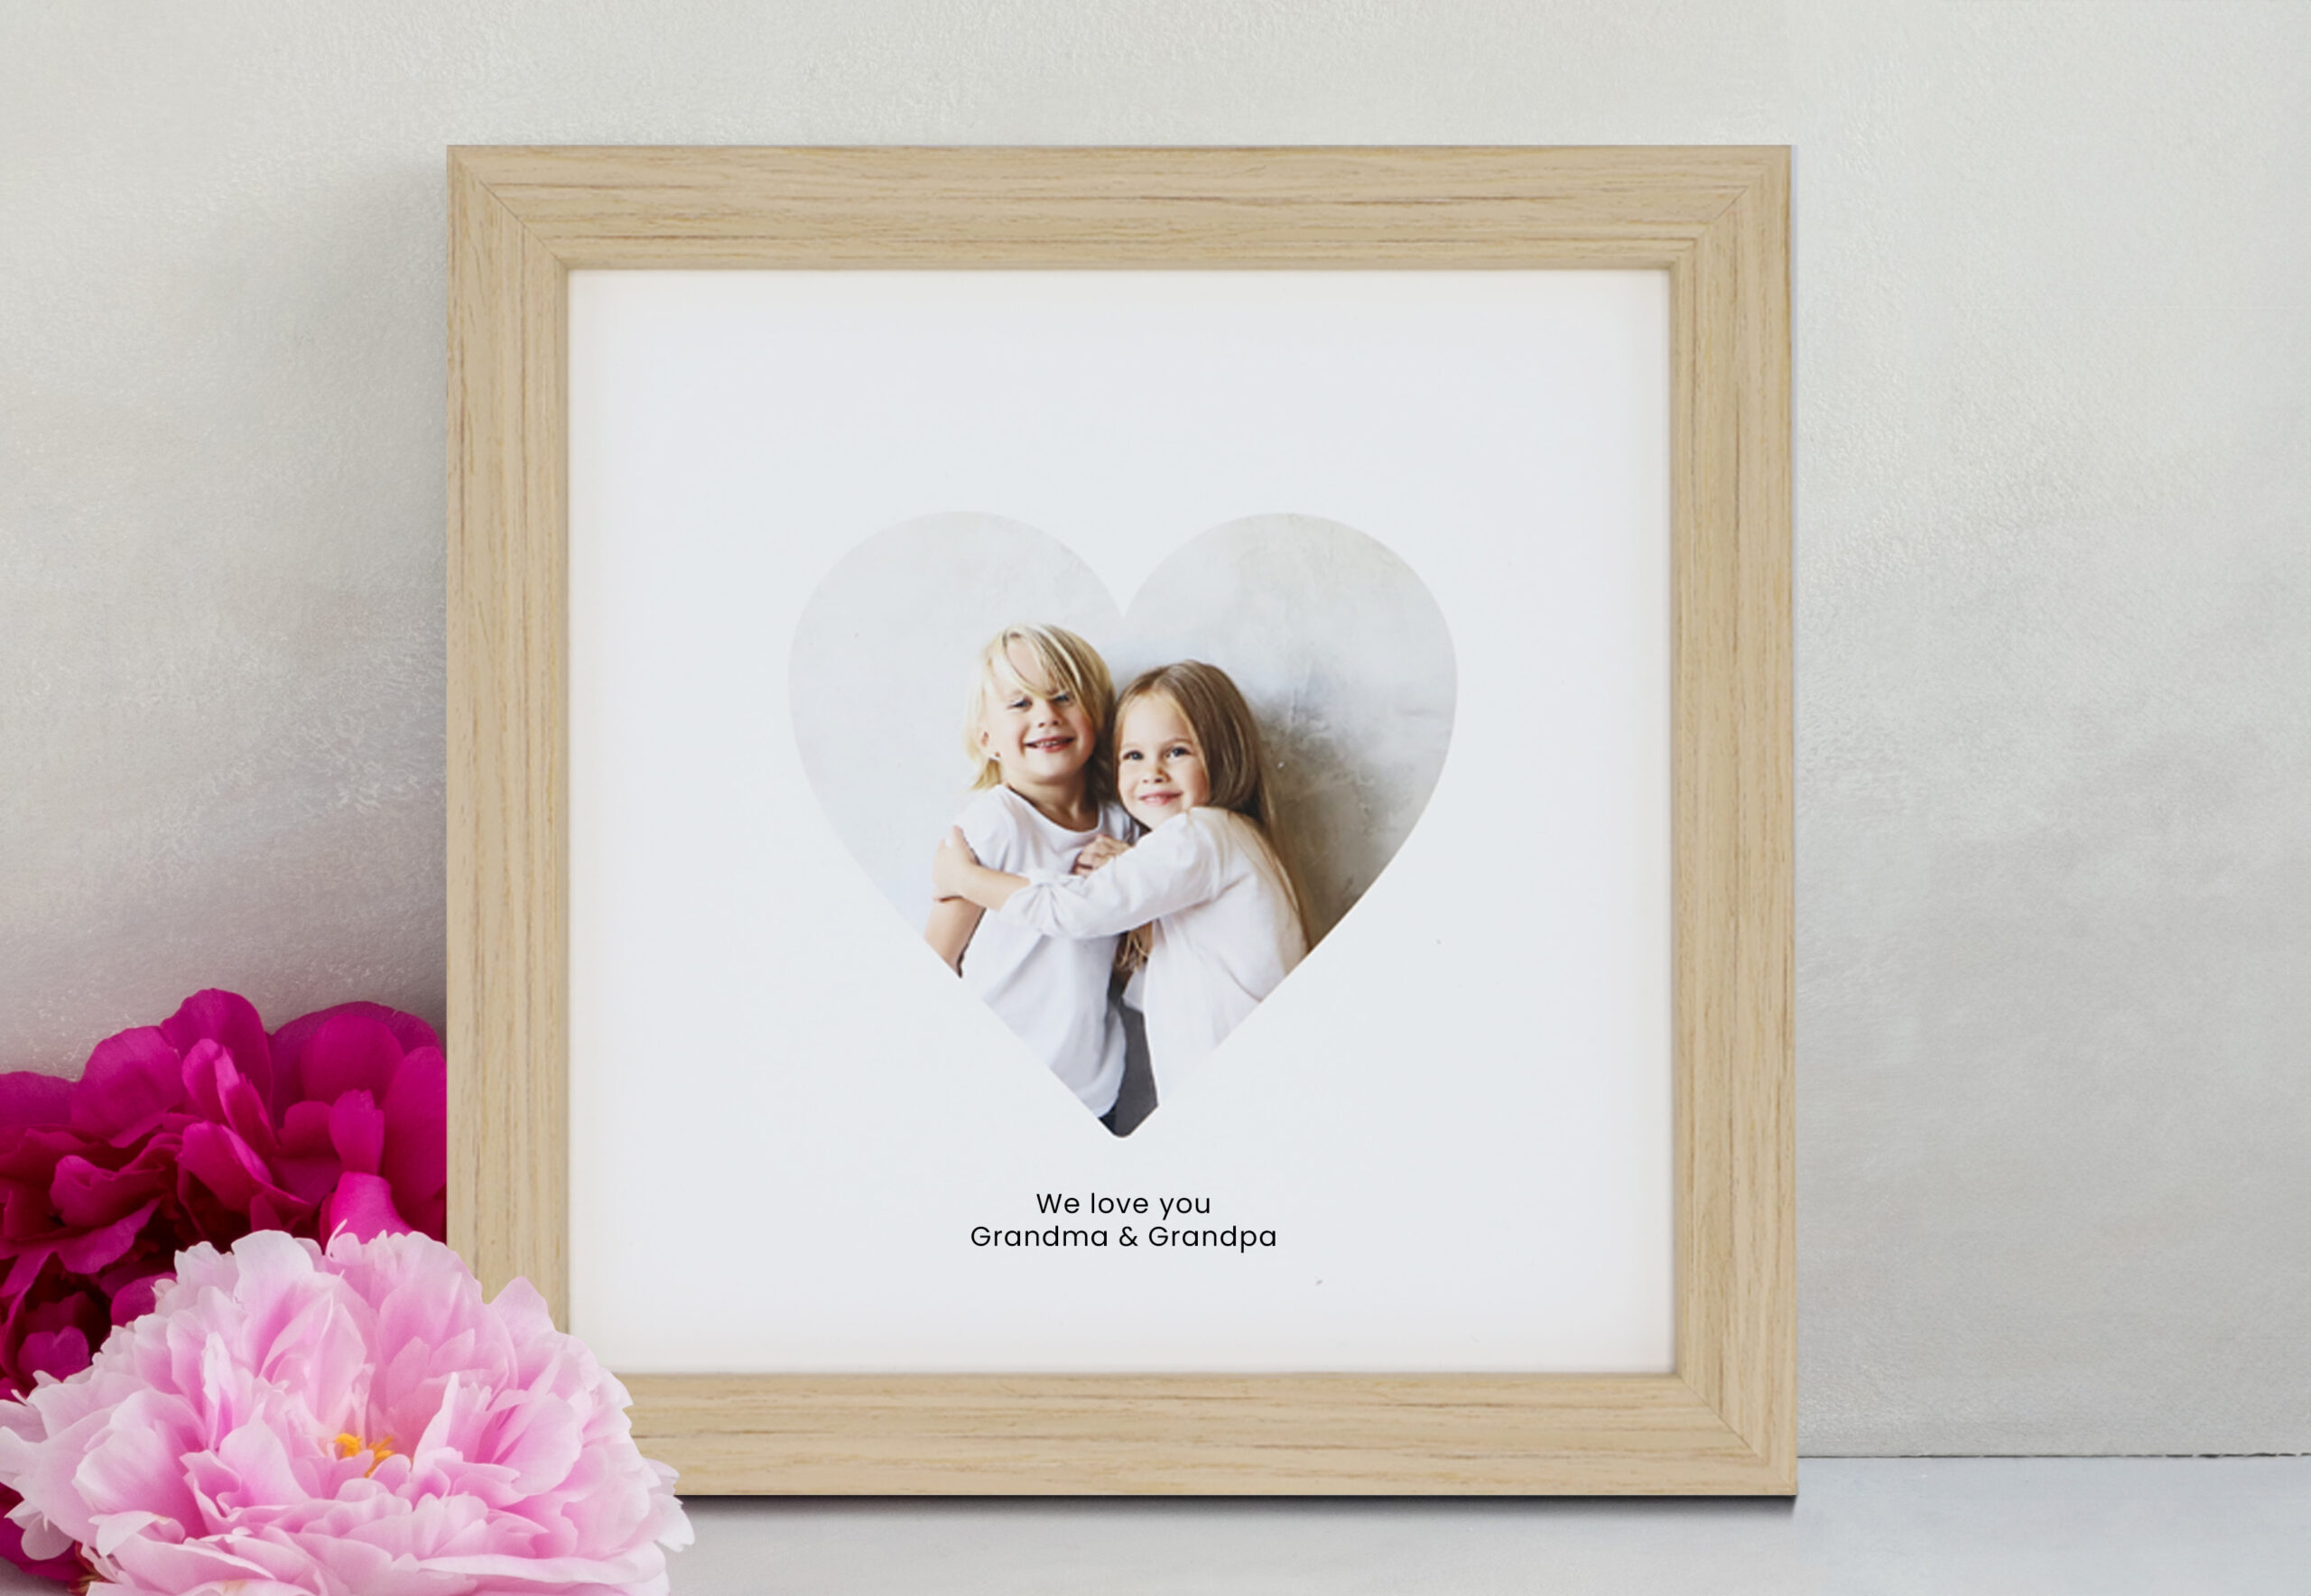 A photo of a Heart image in Pine Wood frame sitting with flowers